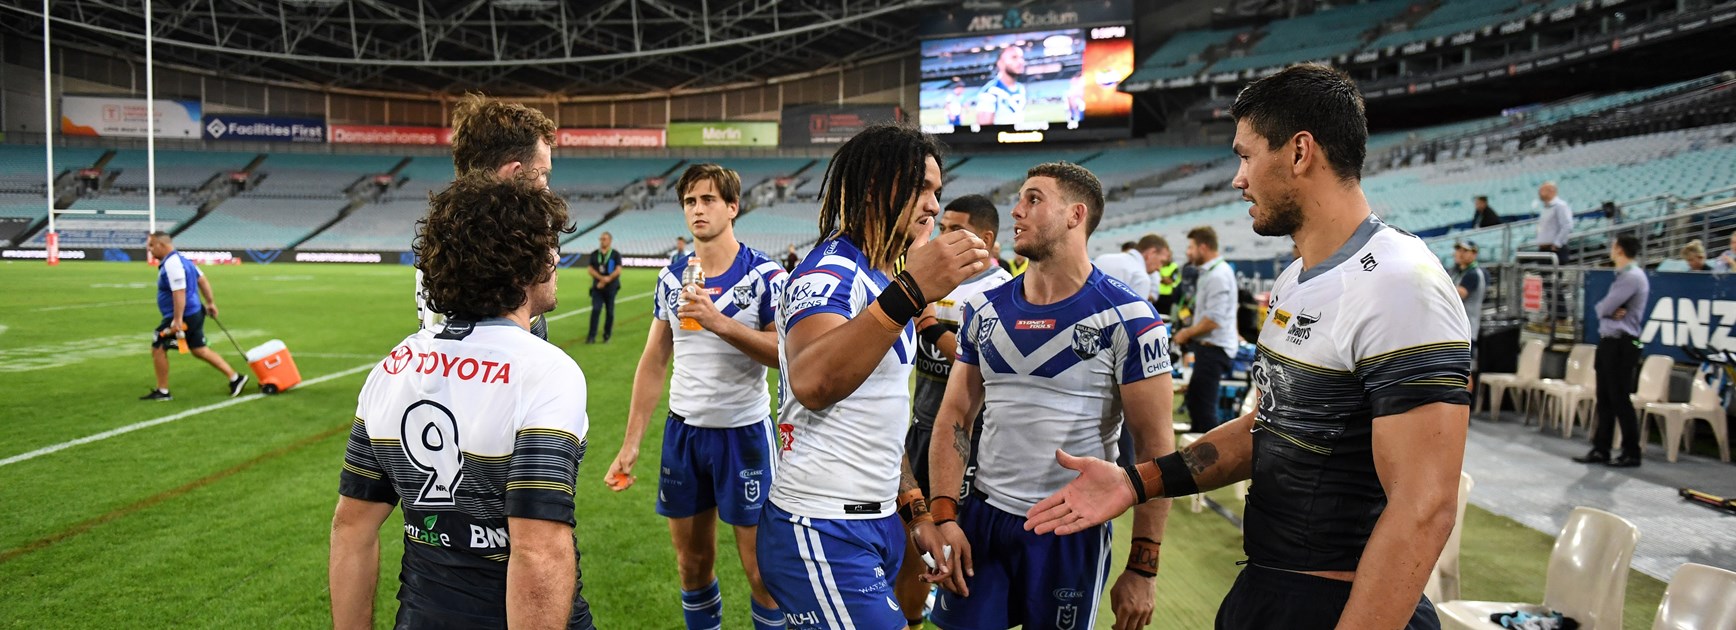 Jokes, banter and a sense of community: Inside the first NRL game without fans